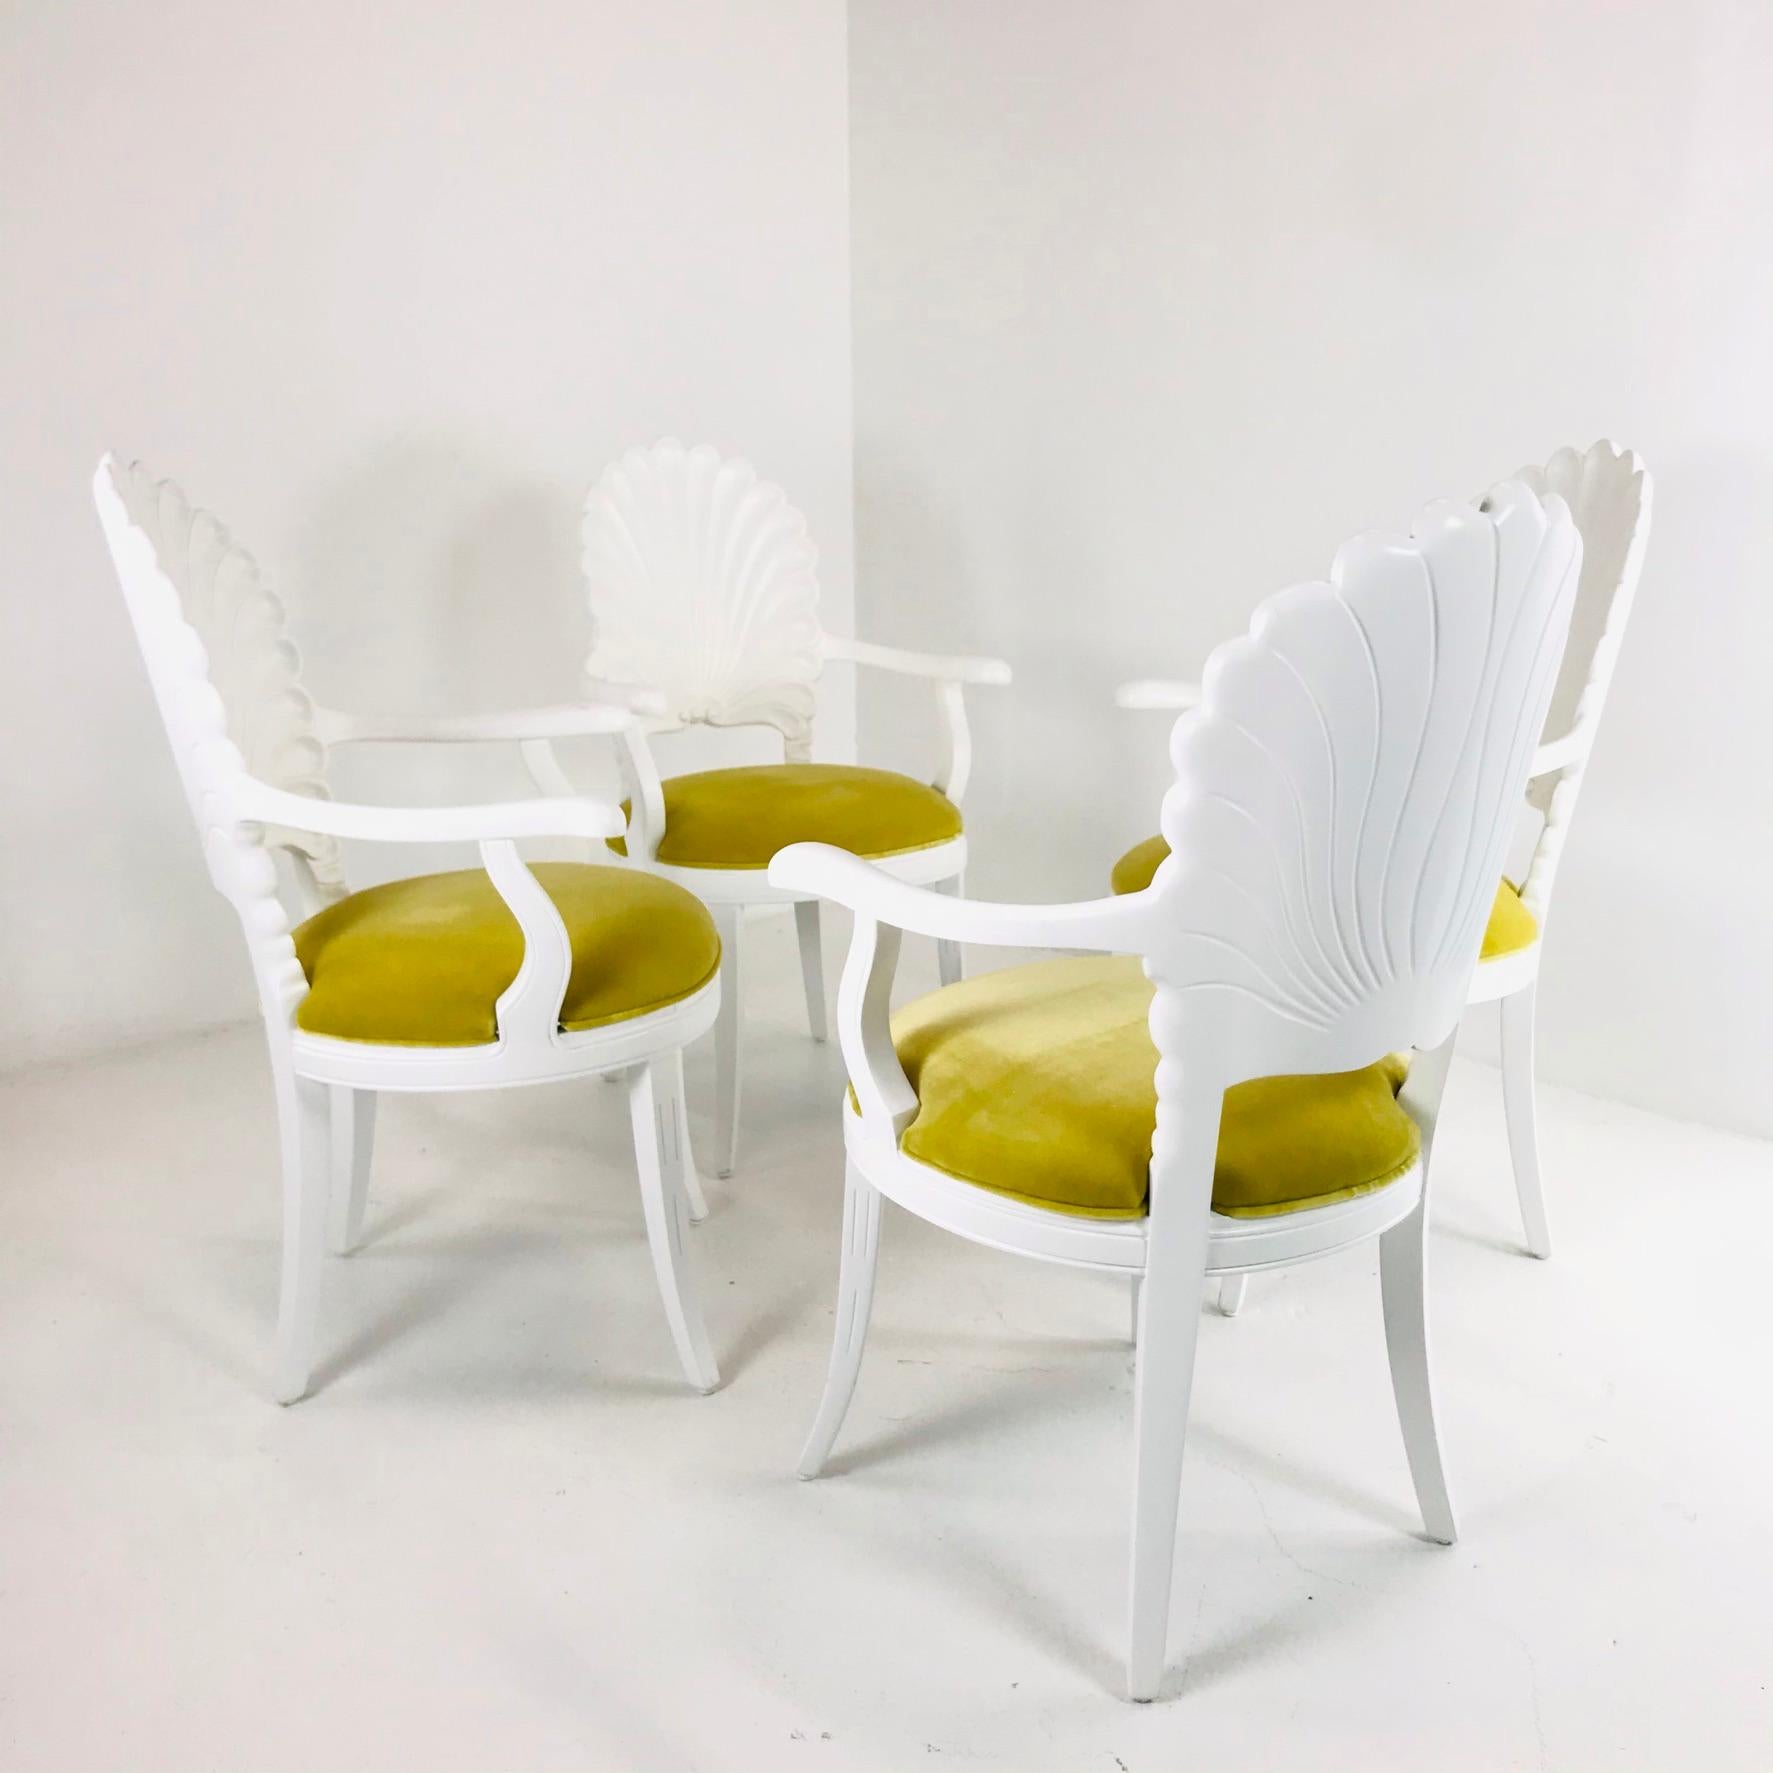 Elegant set of four Venetian Grotto style shell back dining chairs produced in Italy in the Hollywood Regency taste. Features a hand carved frame with a scalloped shell motif back. New white lacquer finish and new luxury yellow velvet upholstery